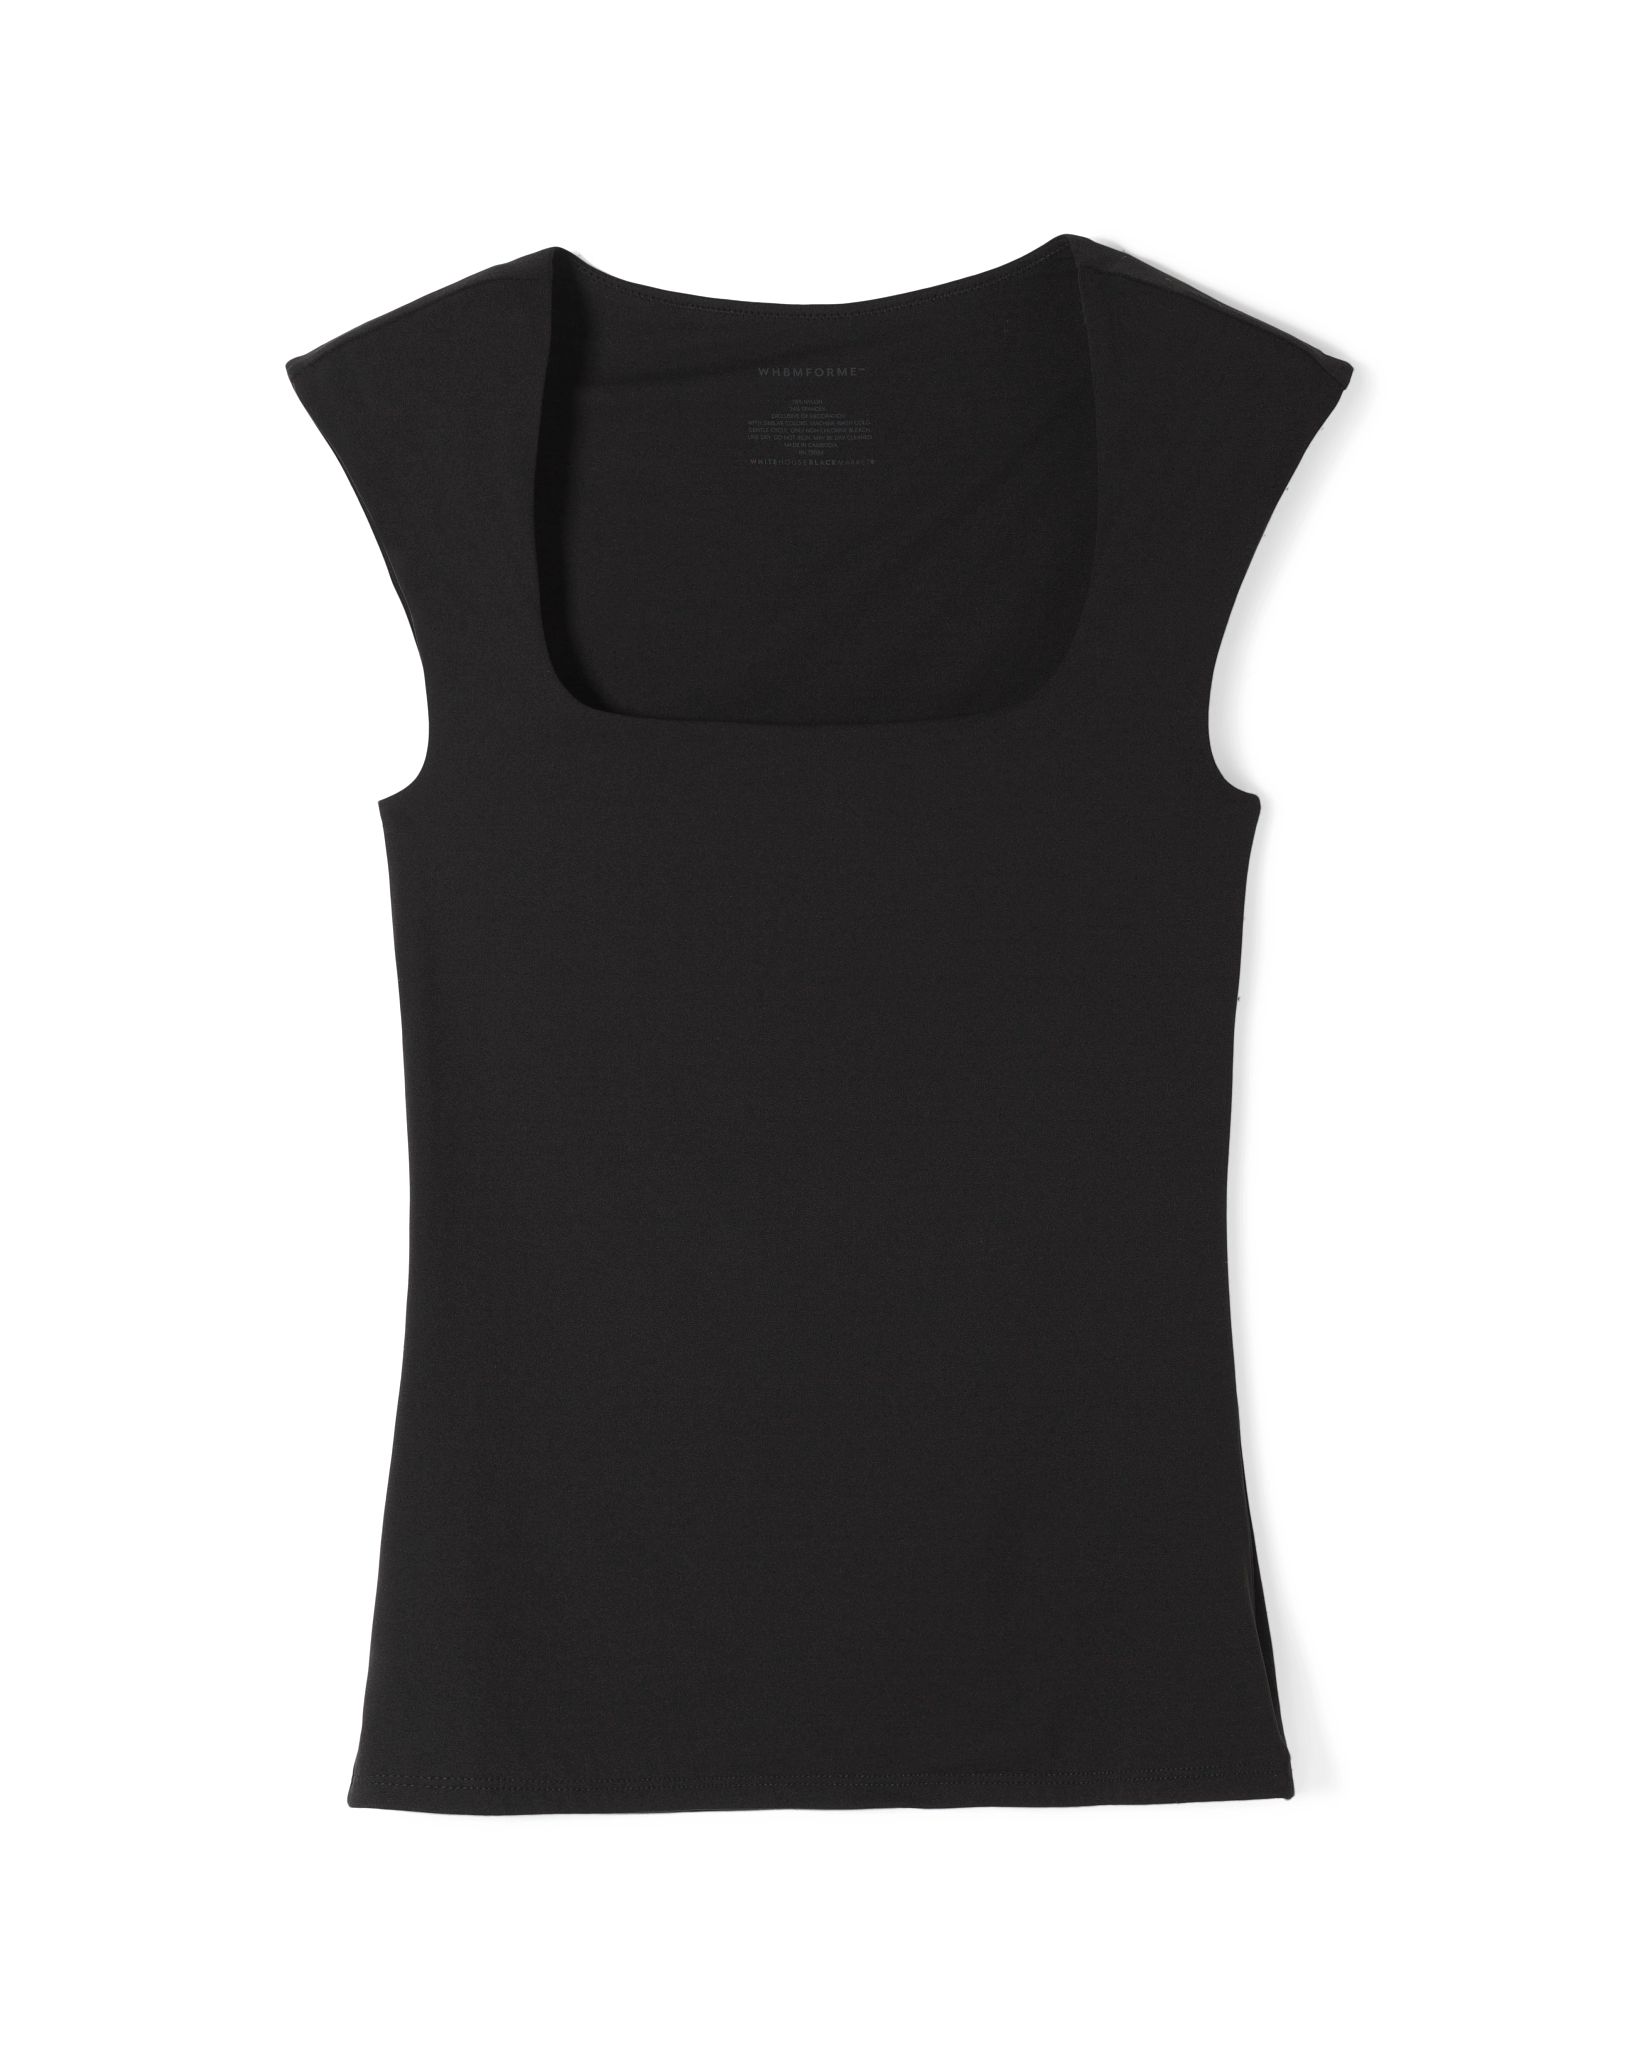 WHBM® FORME Square-Neck Cap-Sleeve Top click to view larger image.